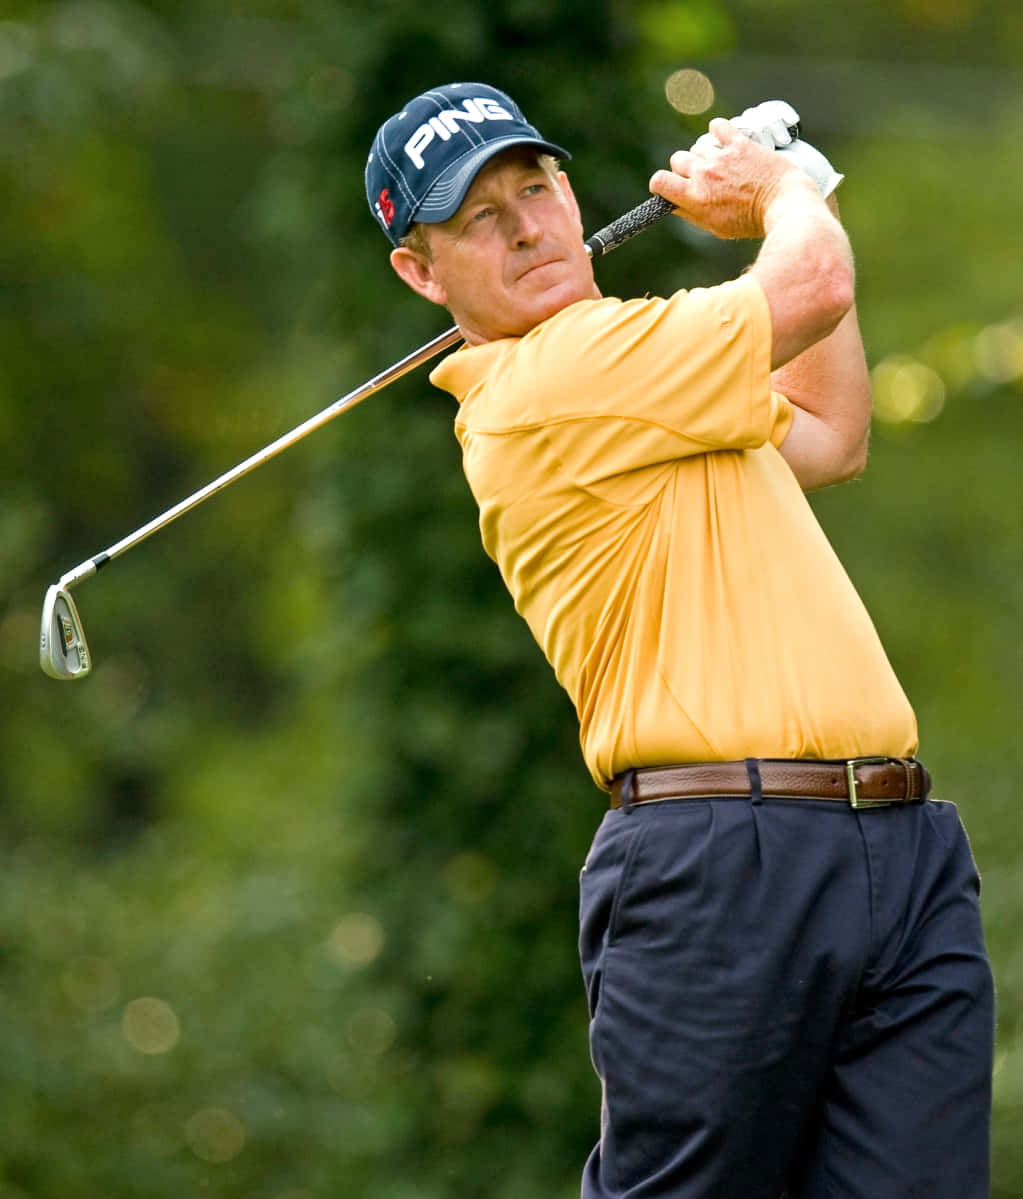 Jeff Maggert In Action During A Golf Tournament Wallpaper